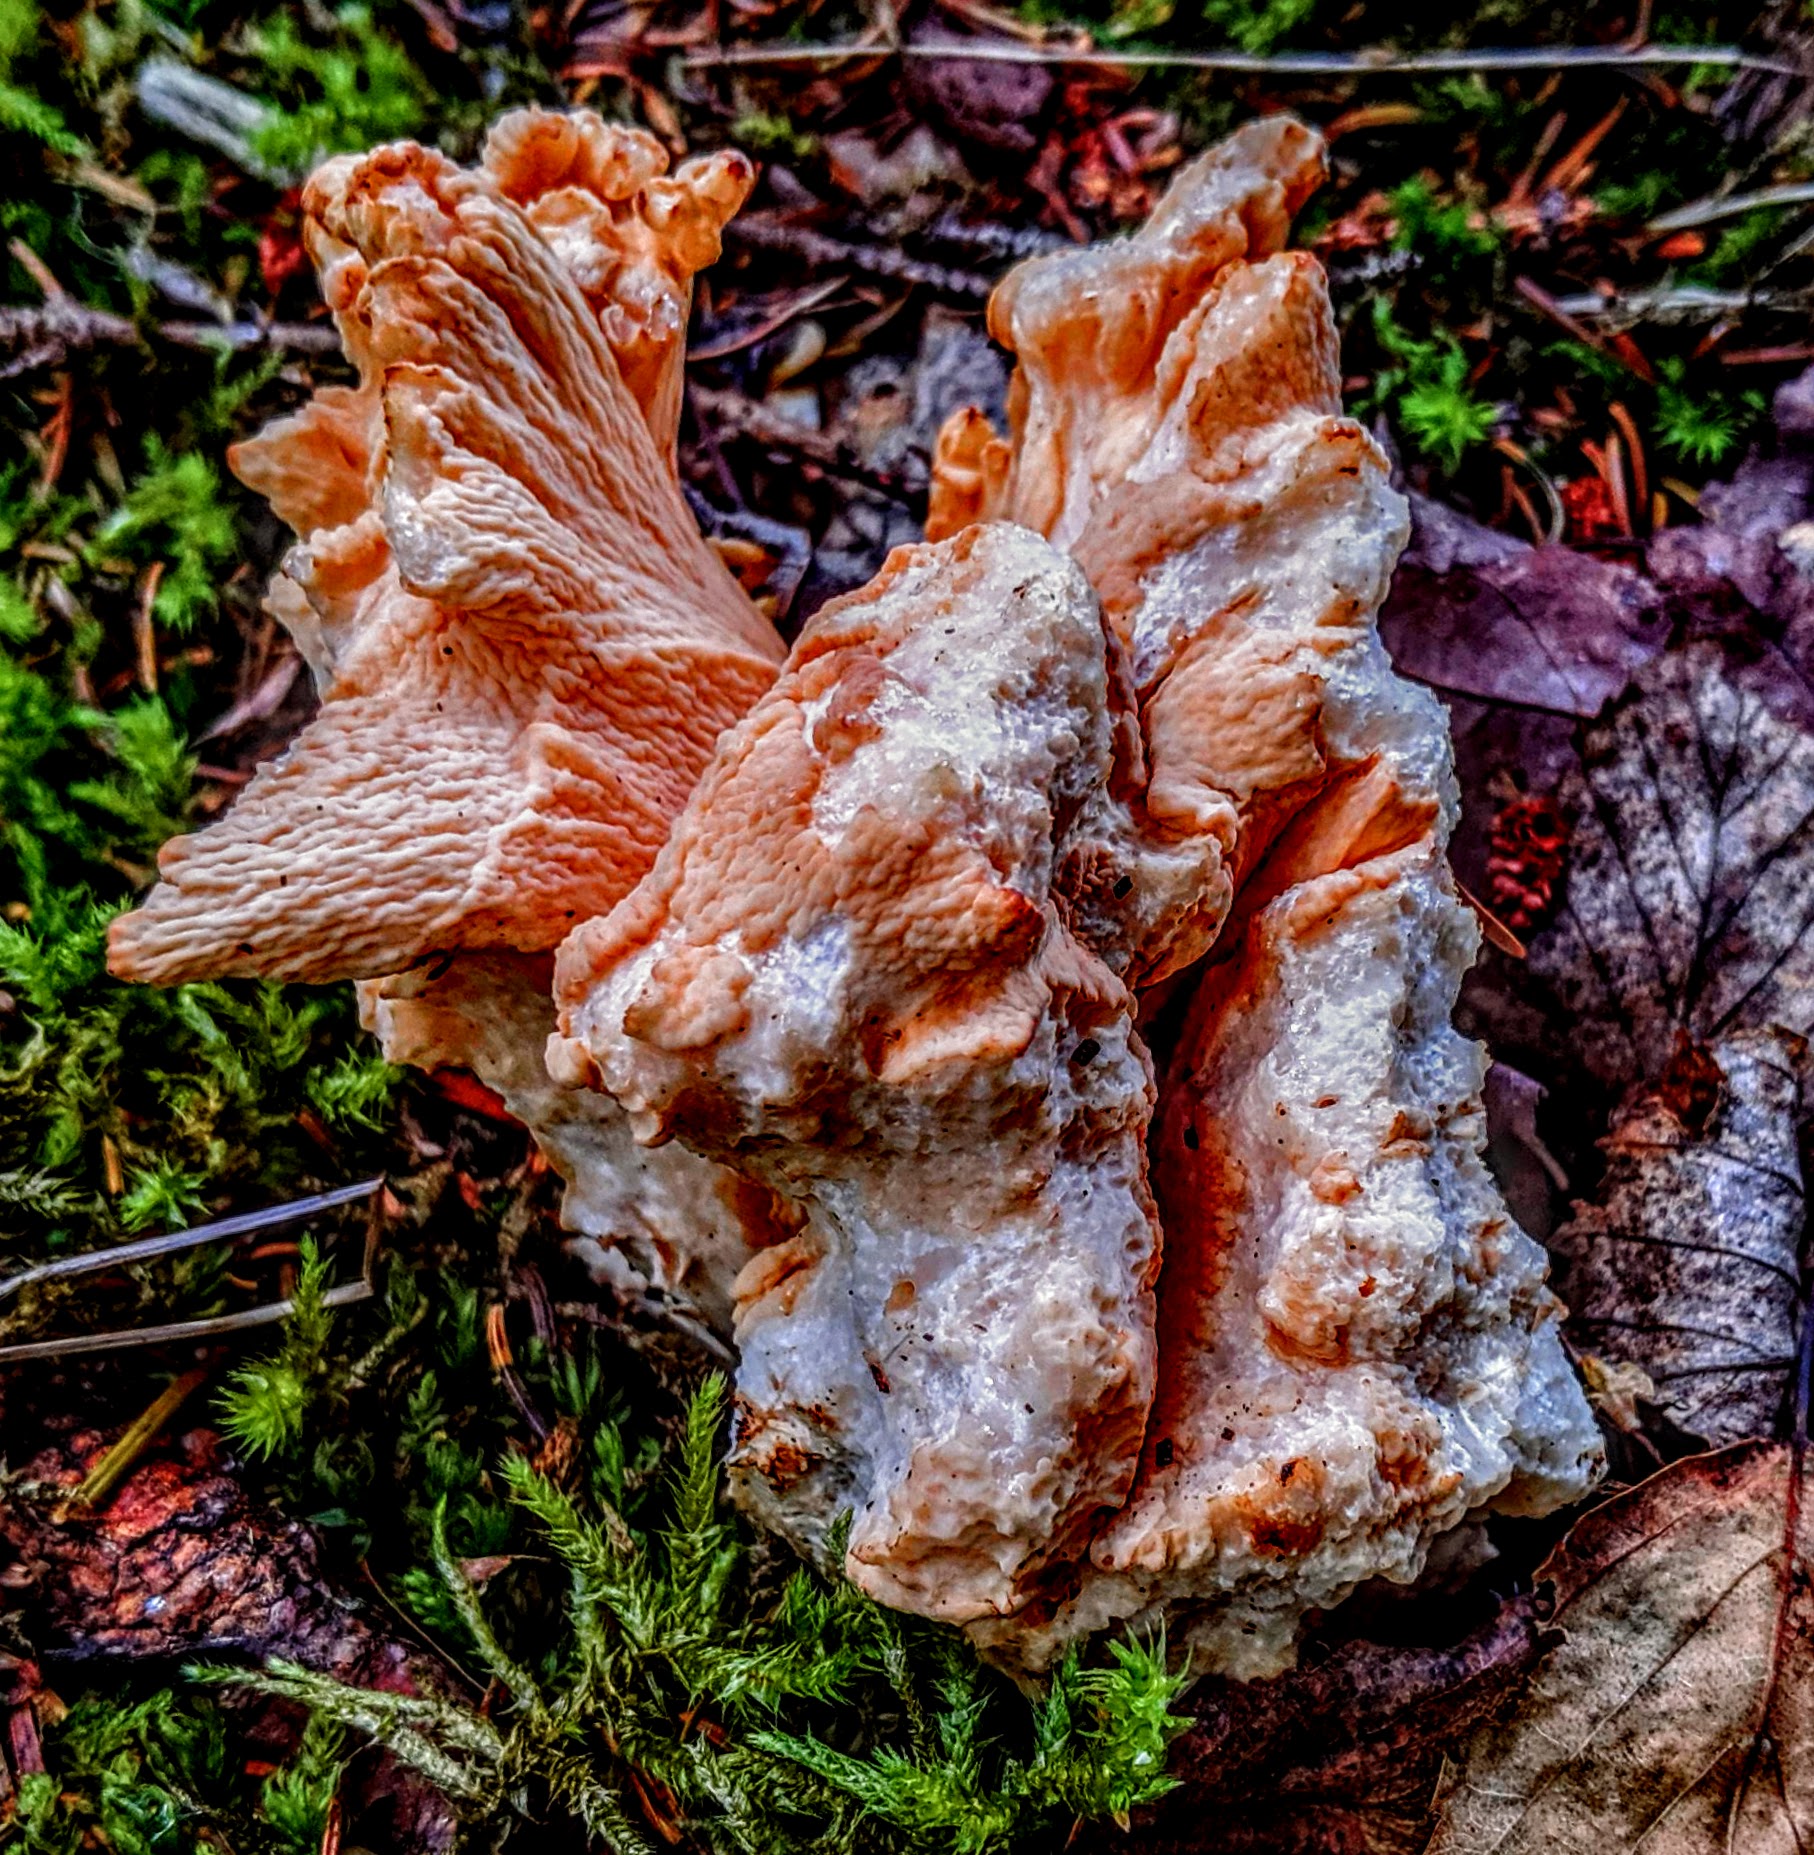 Mushrooms on a tree, in Downeast, Maine. 2019